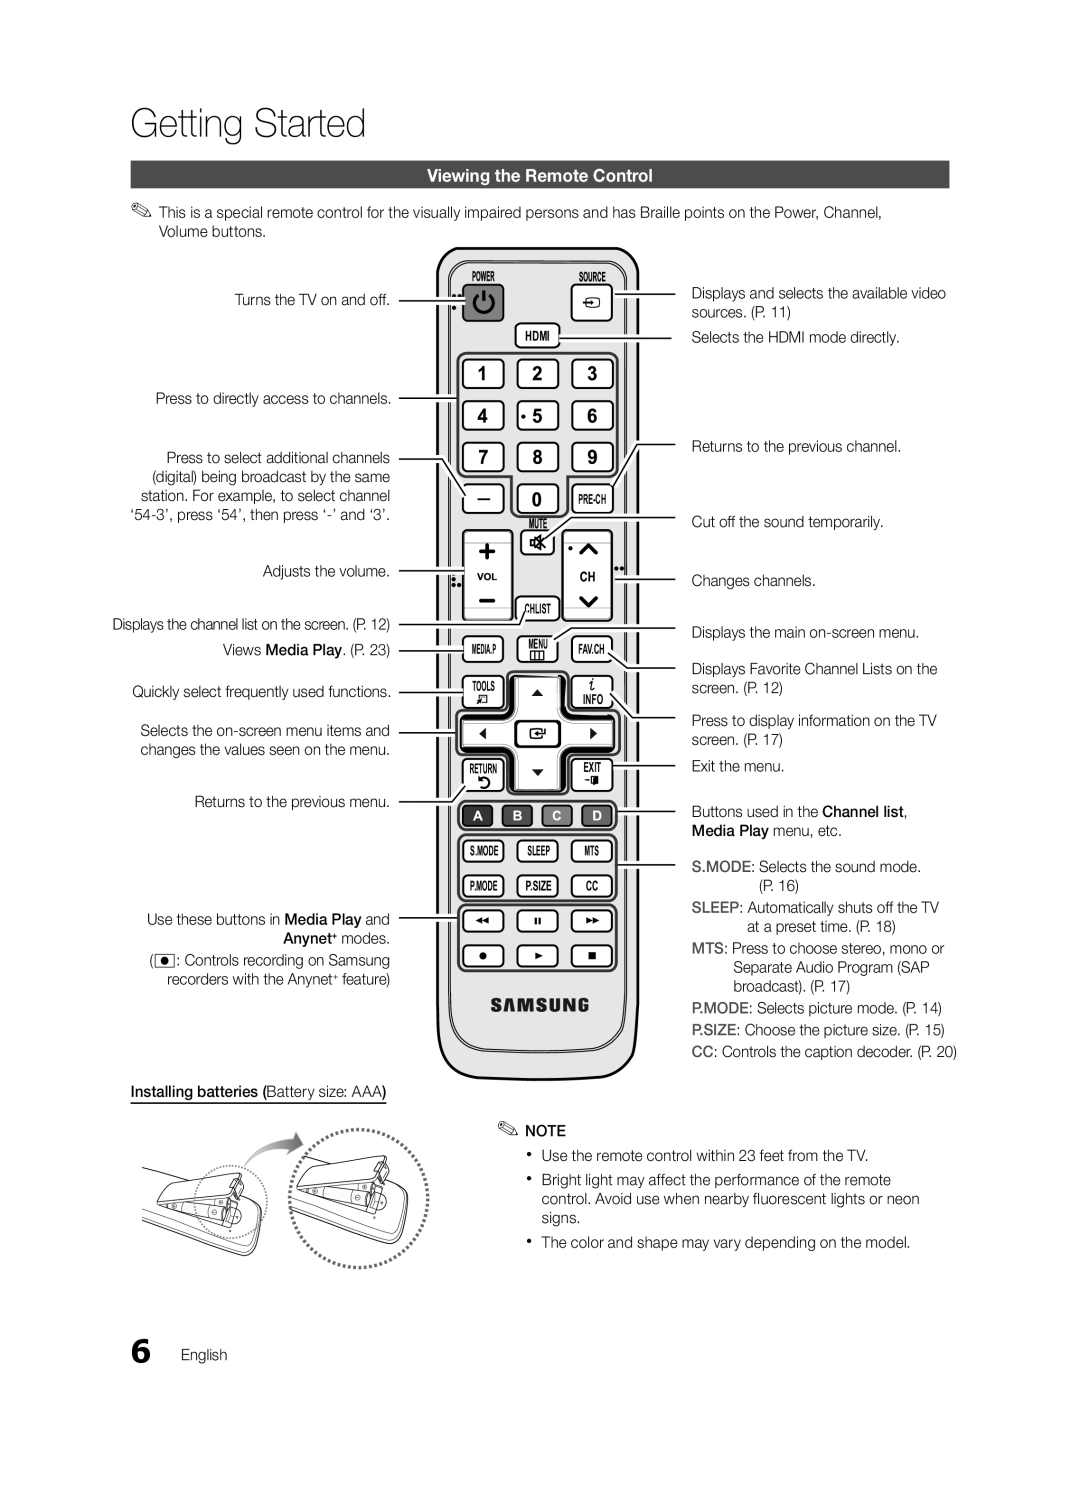 Samsung LN37C530, LN52C530, LN32C530, LN46C540, LN46C530 user manual Viewing the Remote Control, Getting Started 